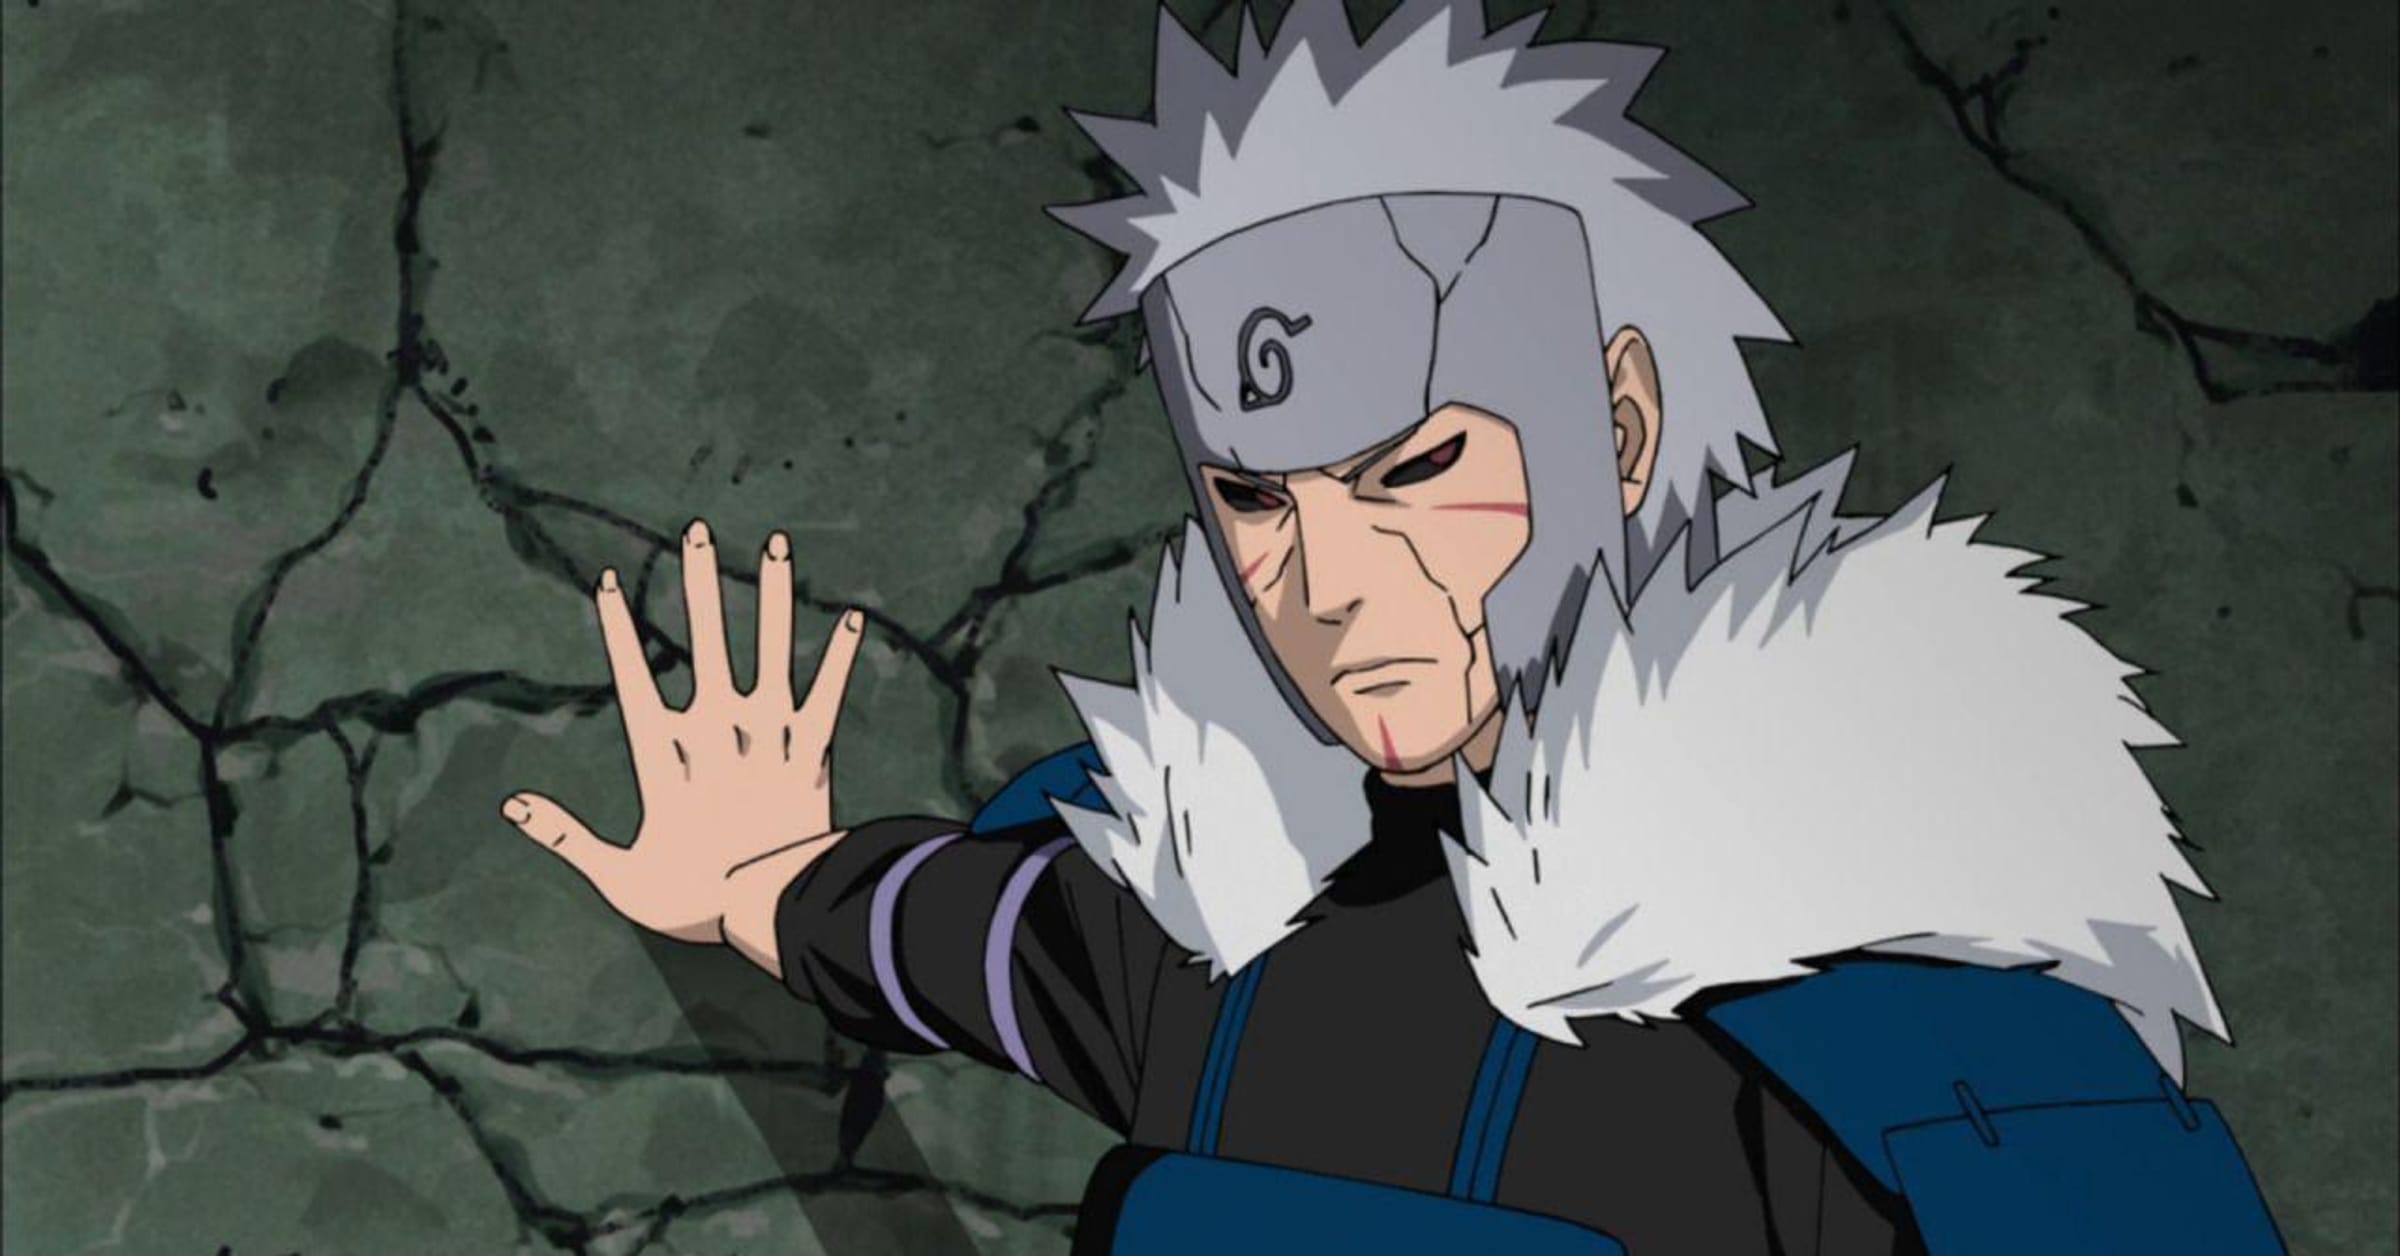 15 Interesting Things You Might Not Know About Tobirama Senju